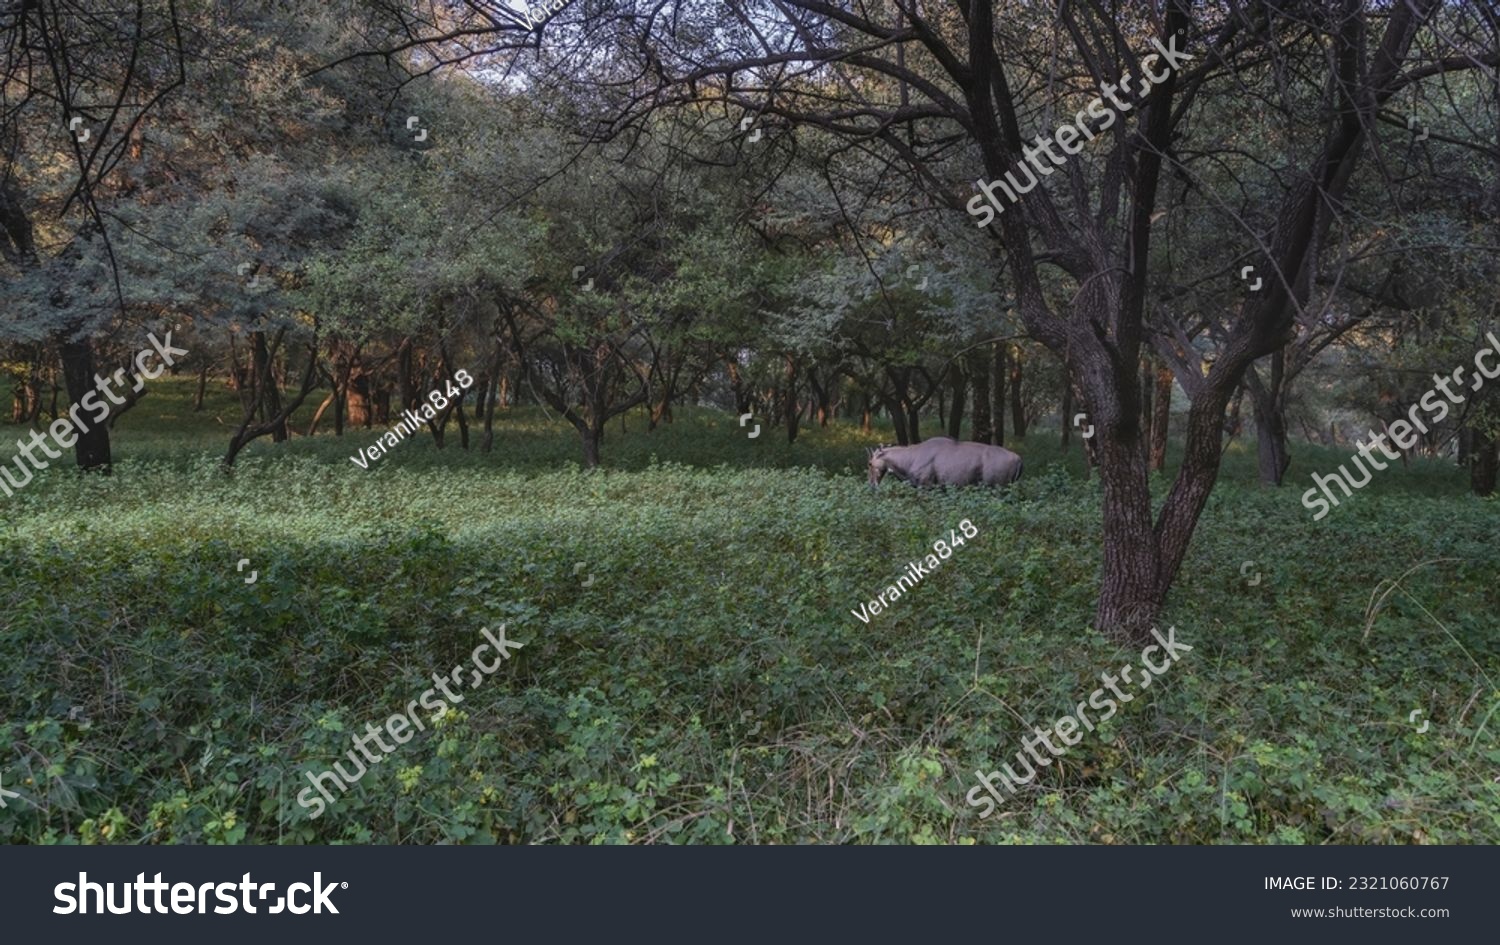 In the thickets of the shady jungle, in a clearing with green grass, an antelope nilgai – Boselaphus tragocamelus  grazes. India. Ranthambore National Park. #2321060767